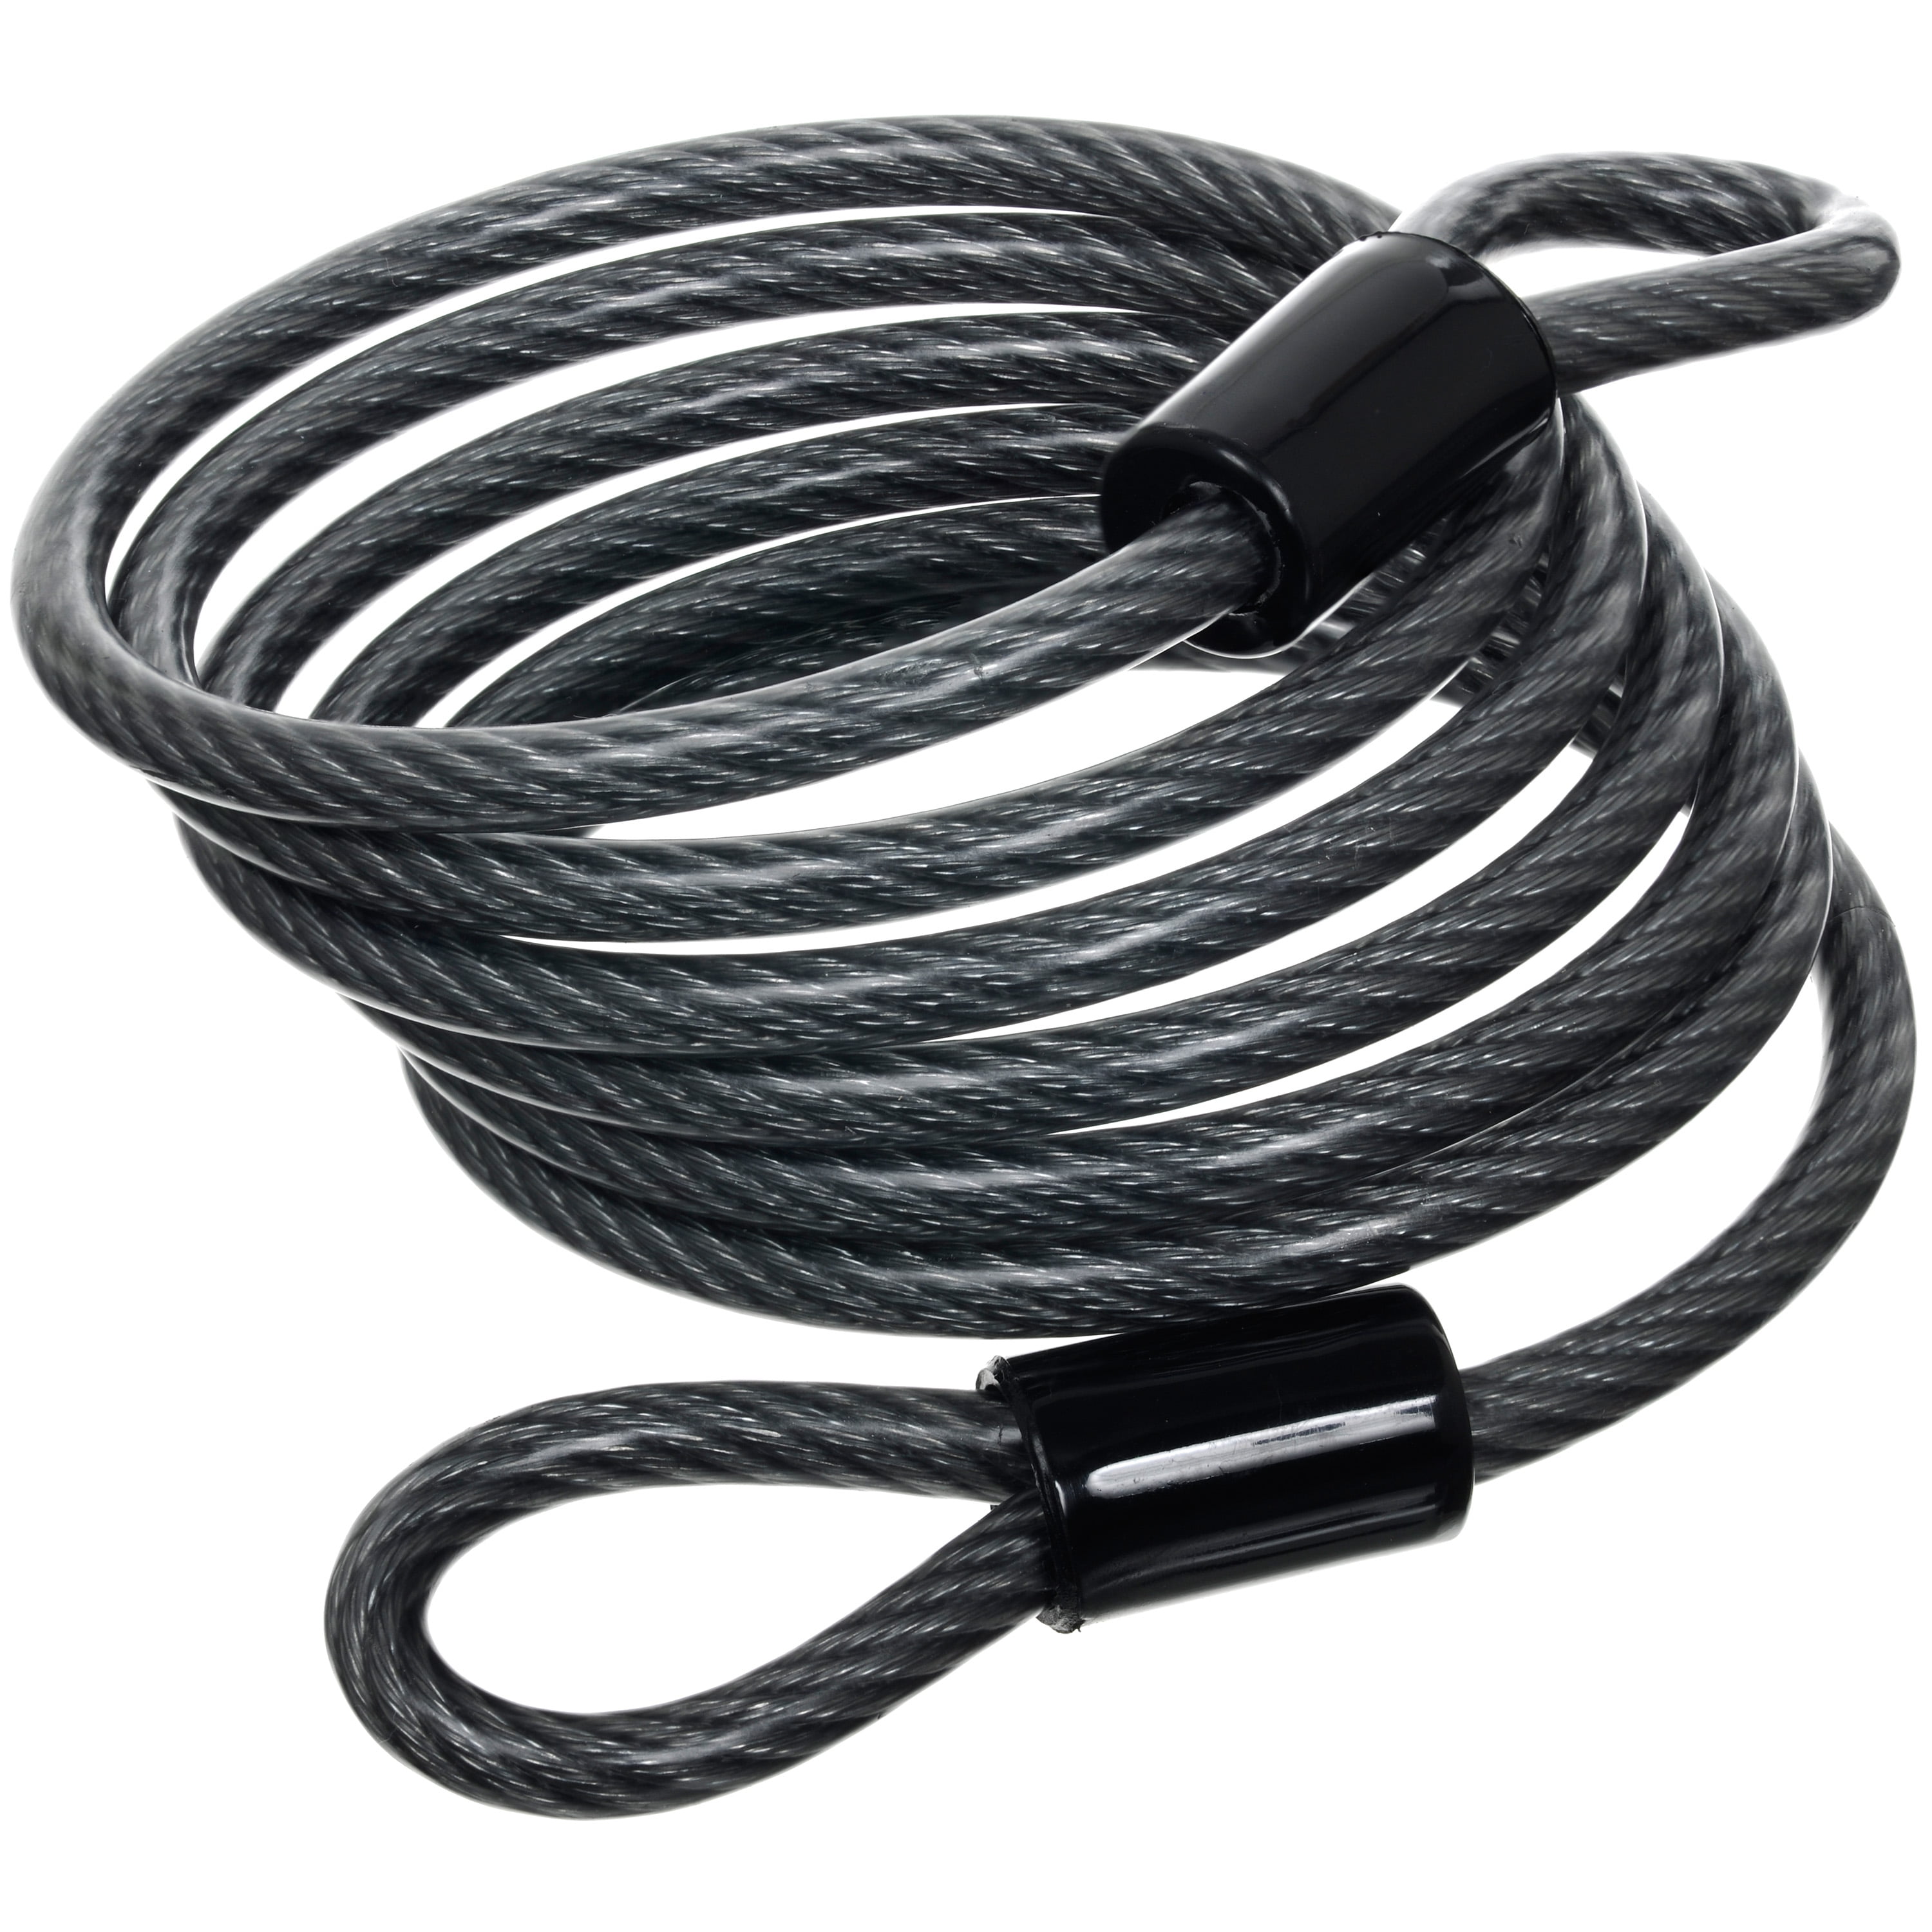 Hyper Tough 1/4 in. x 6 ft. Vinyl Covered Flexible Open Loop Cable Lock